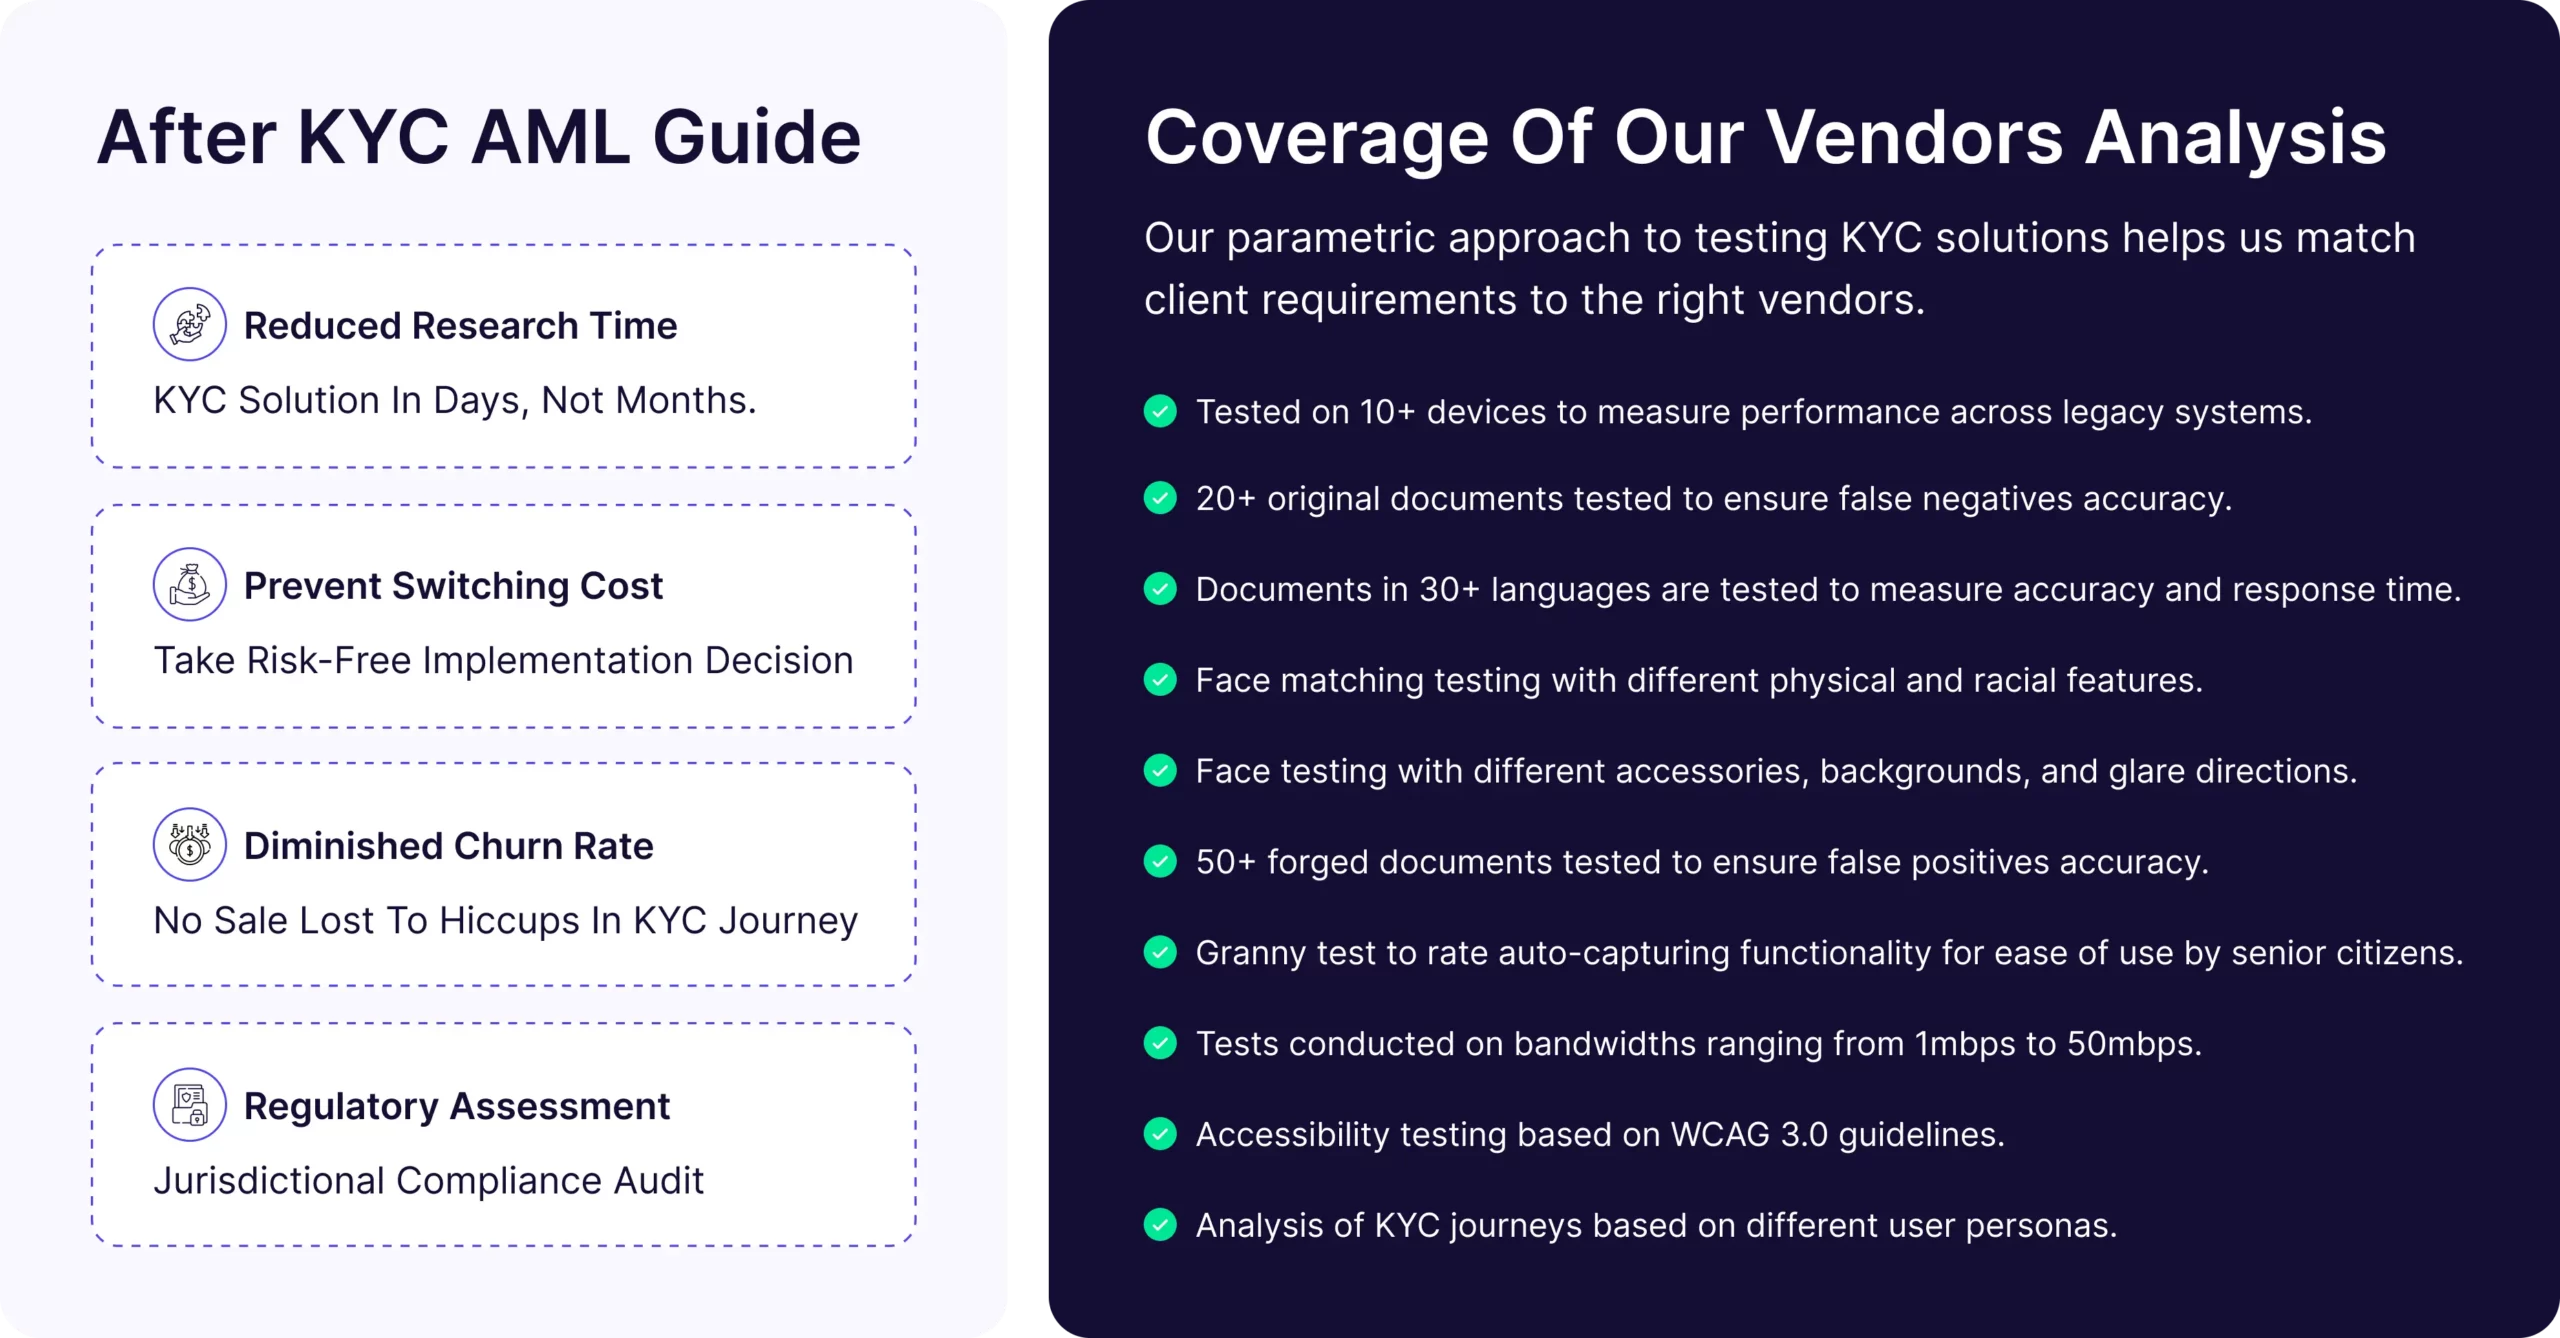 Coverage of Our Vendor Analysis